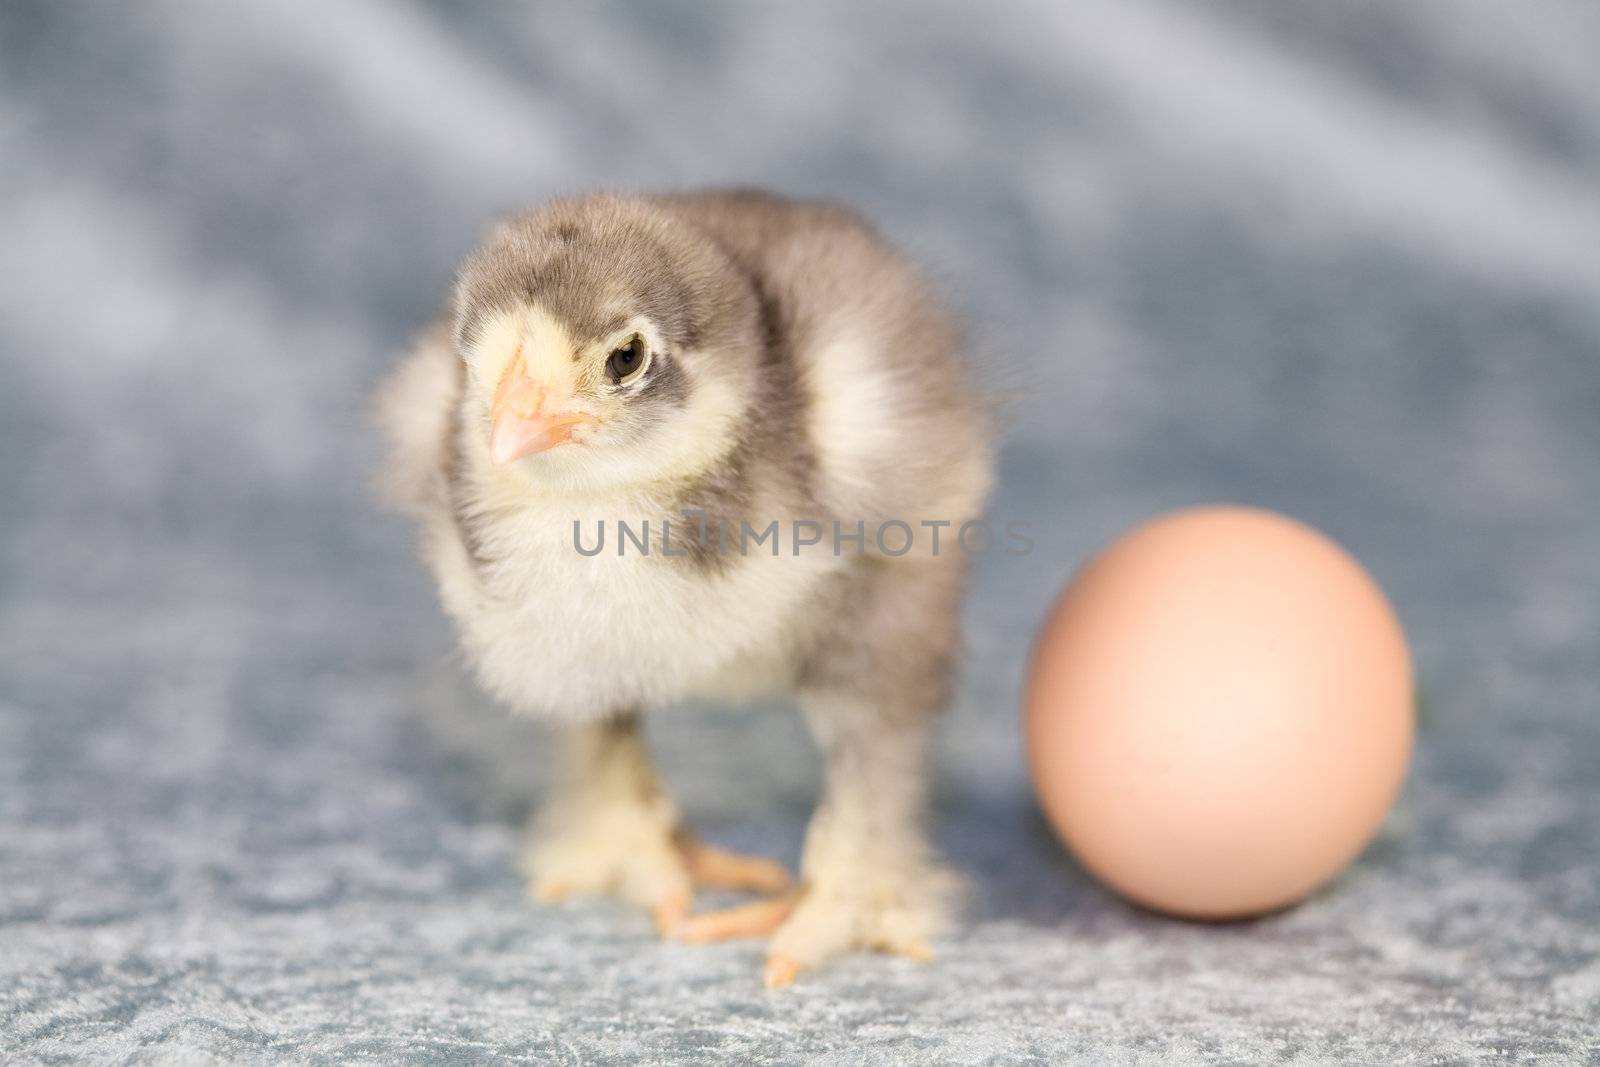 Cute little brahma chick standing next to the egg it was raised from